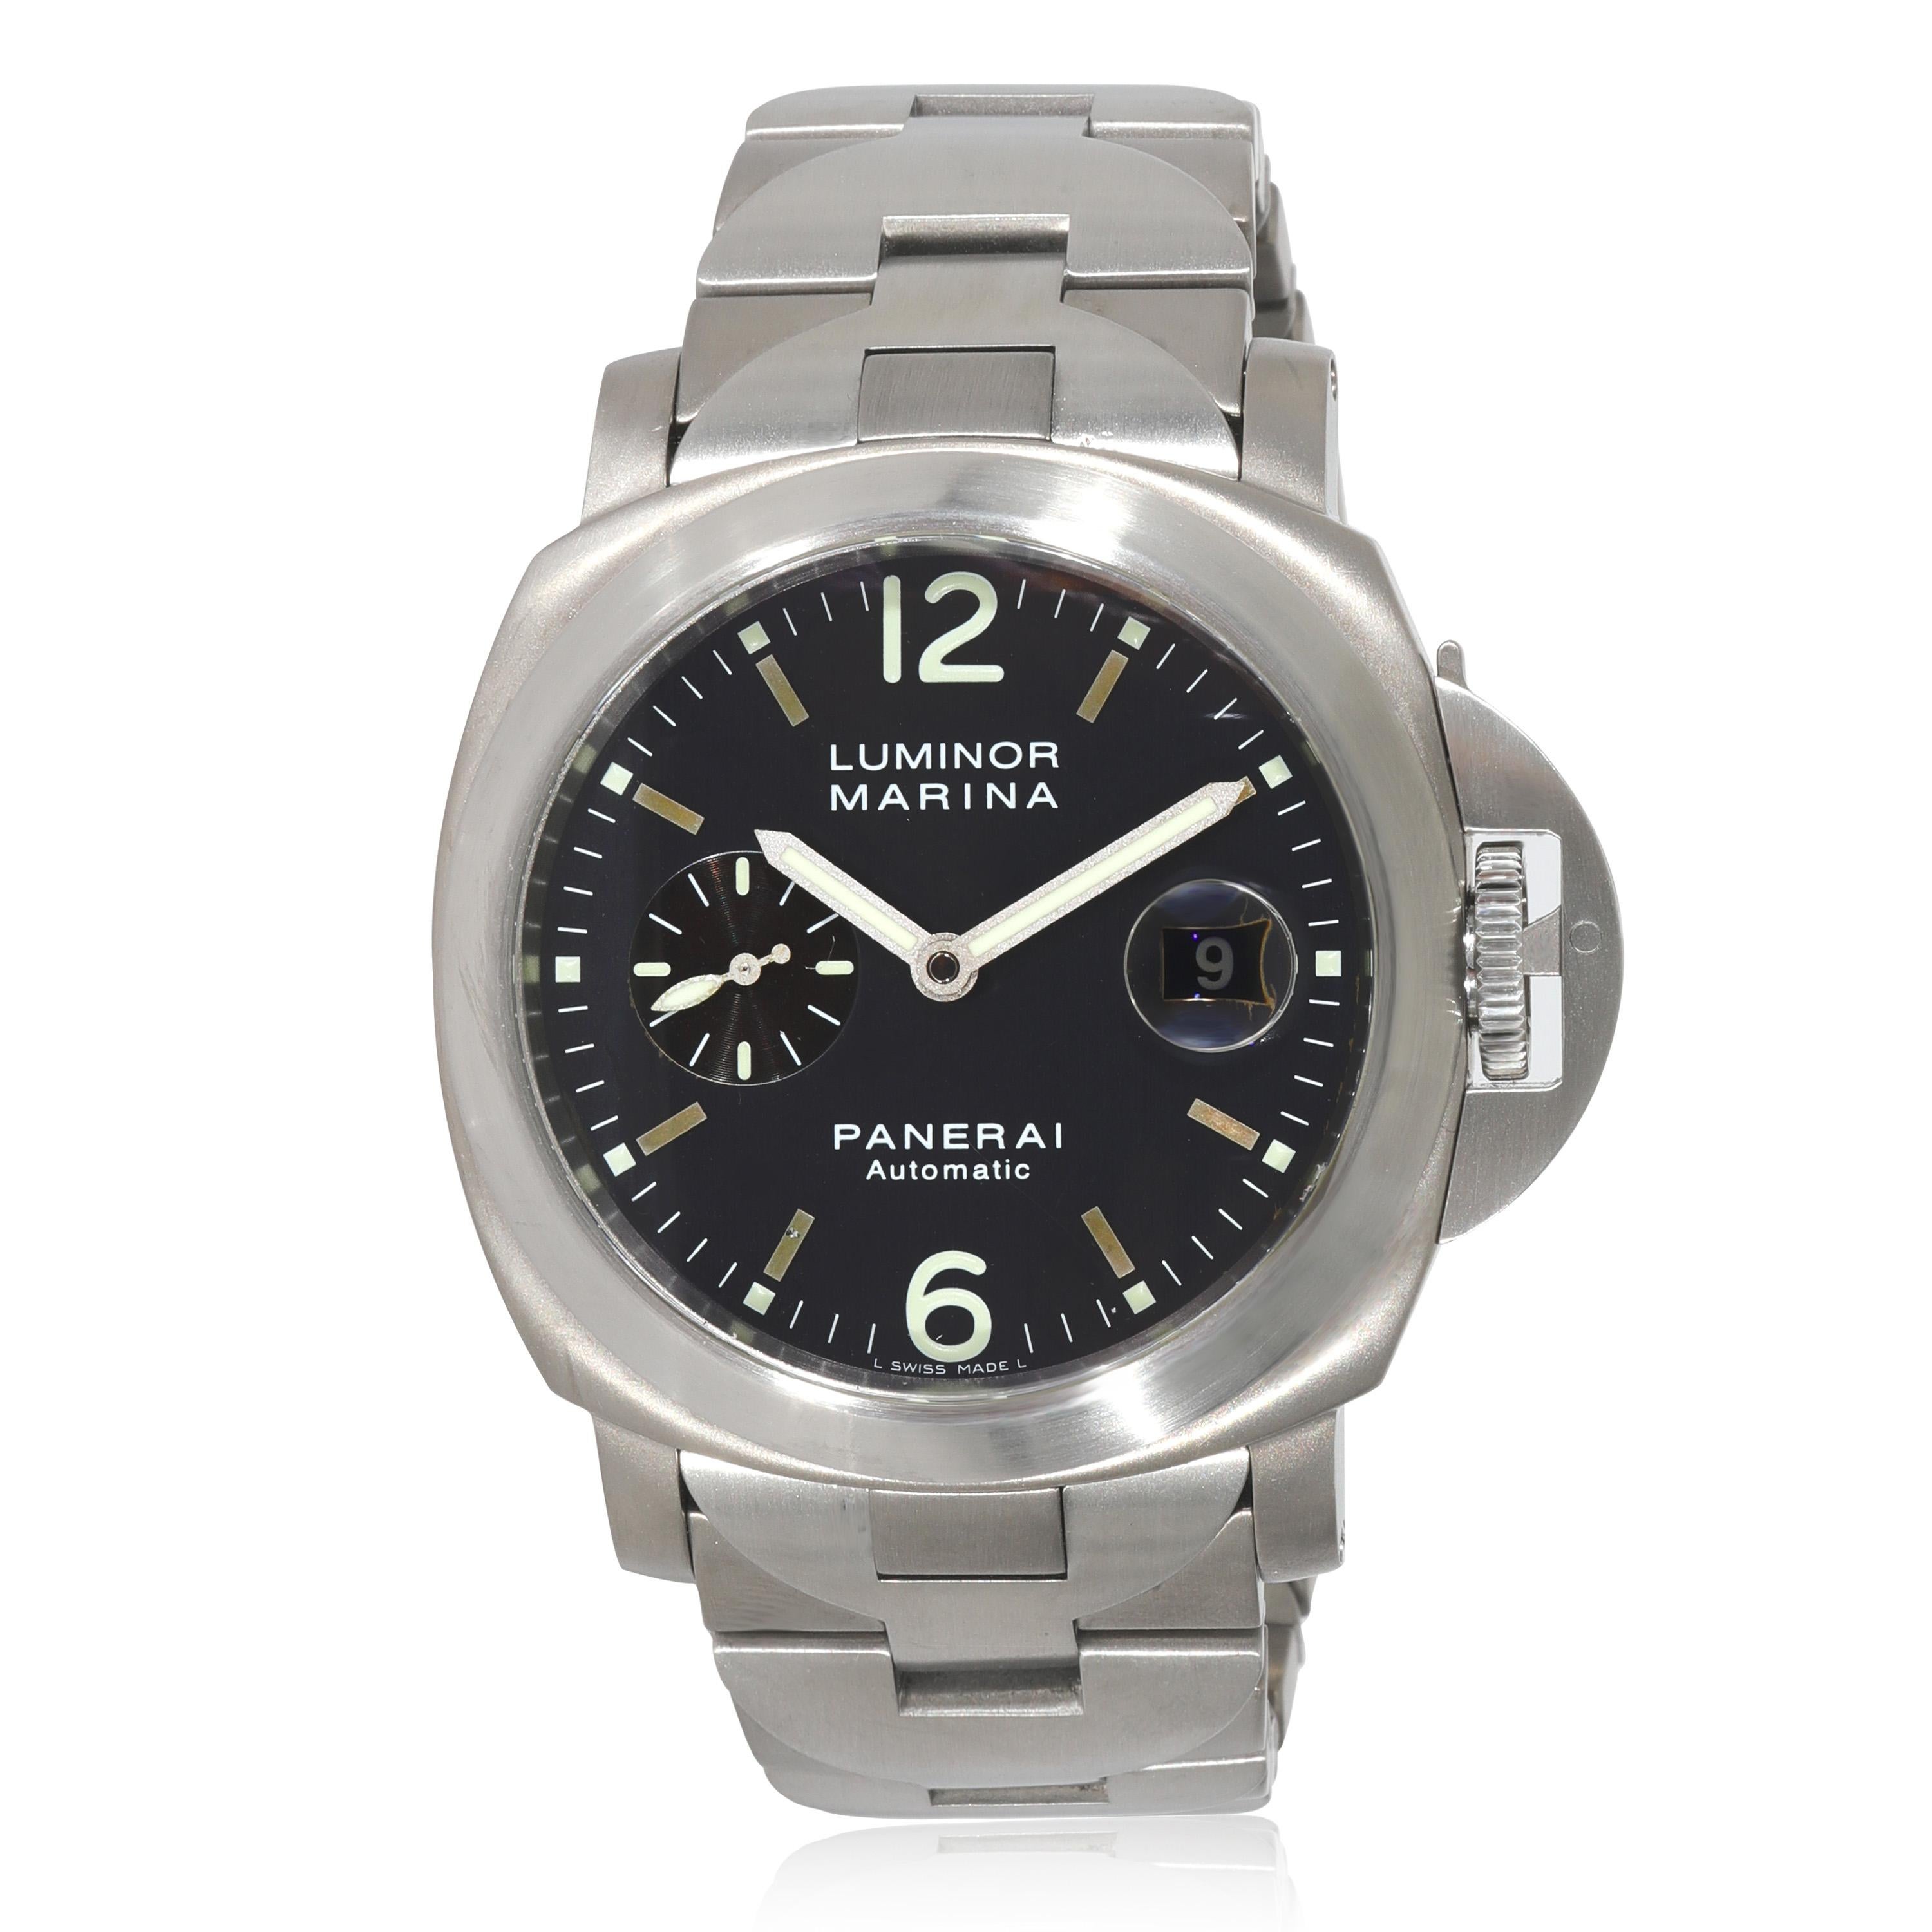 Panerai Luminor Marina PAM00091 Men's Watch in  Titanium In Excellent Condition For Sale In New York, NY